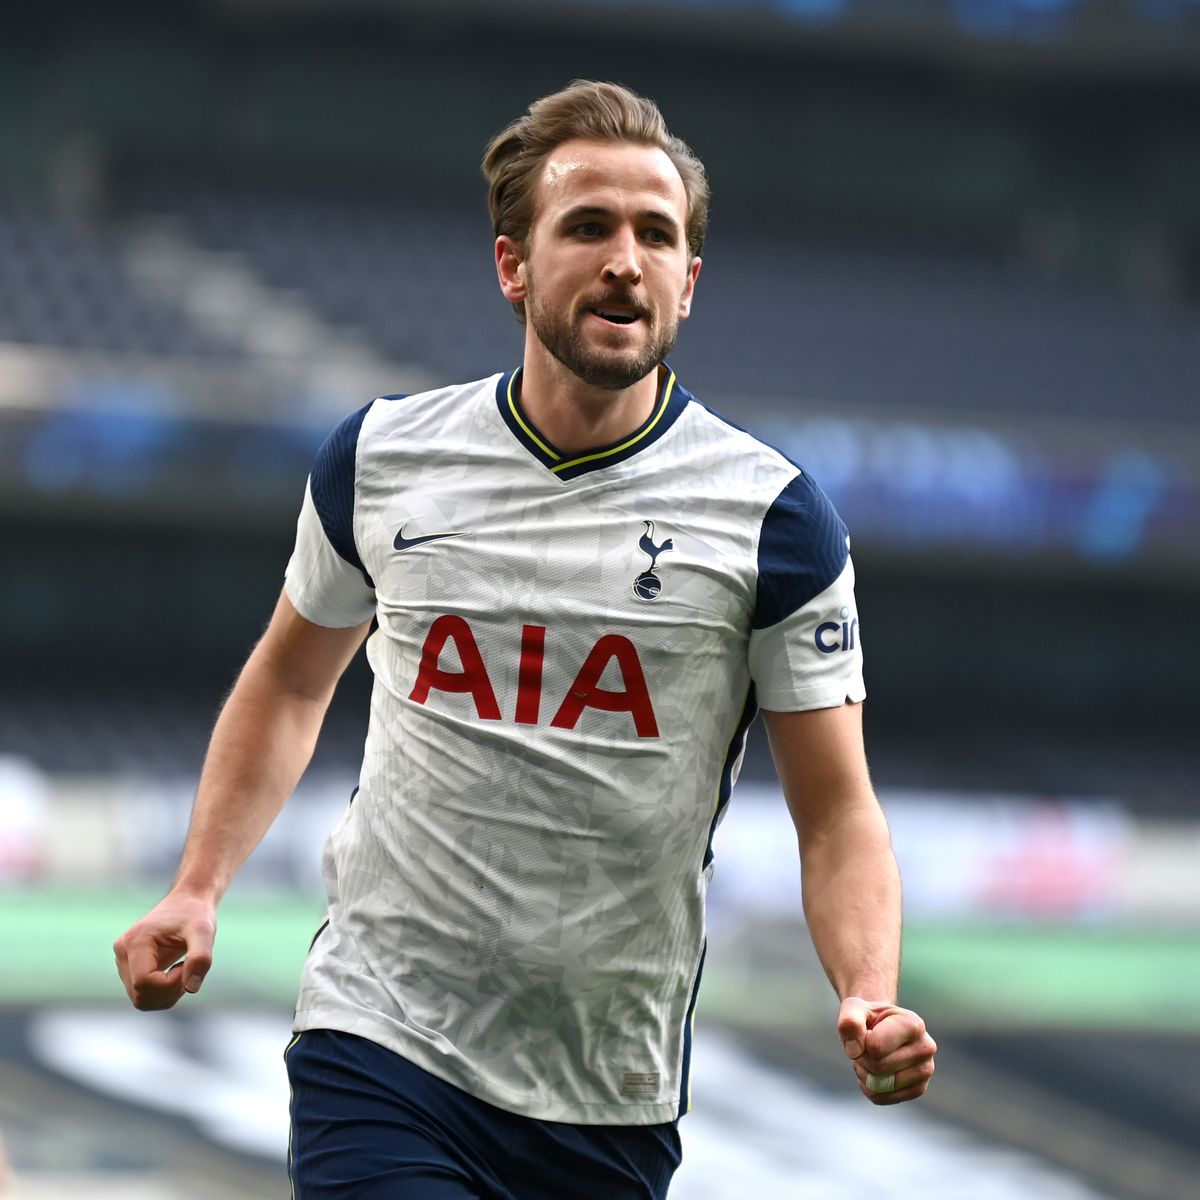 Kane Calls For Better Transfer Policy At Spurs